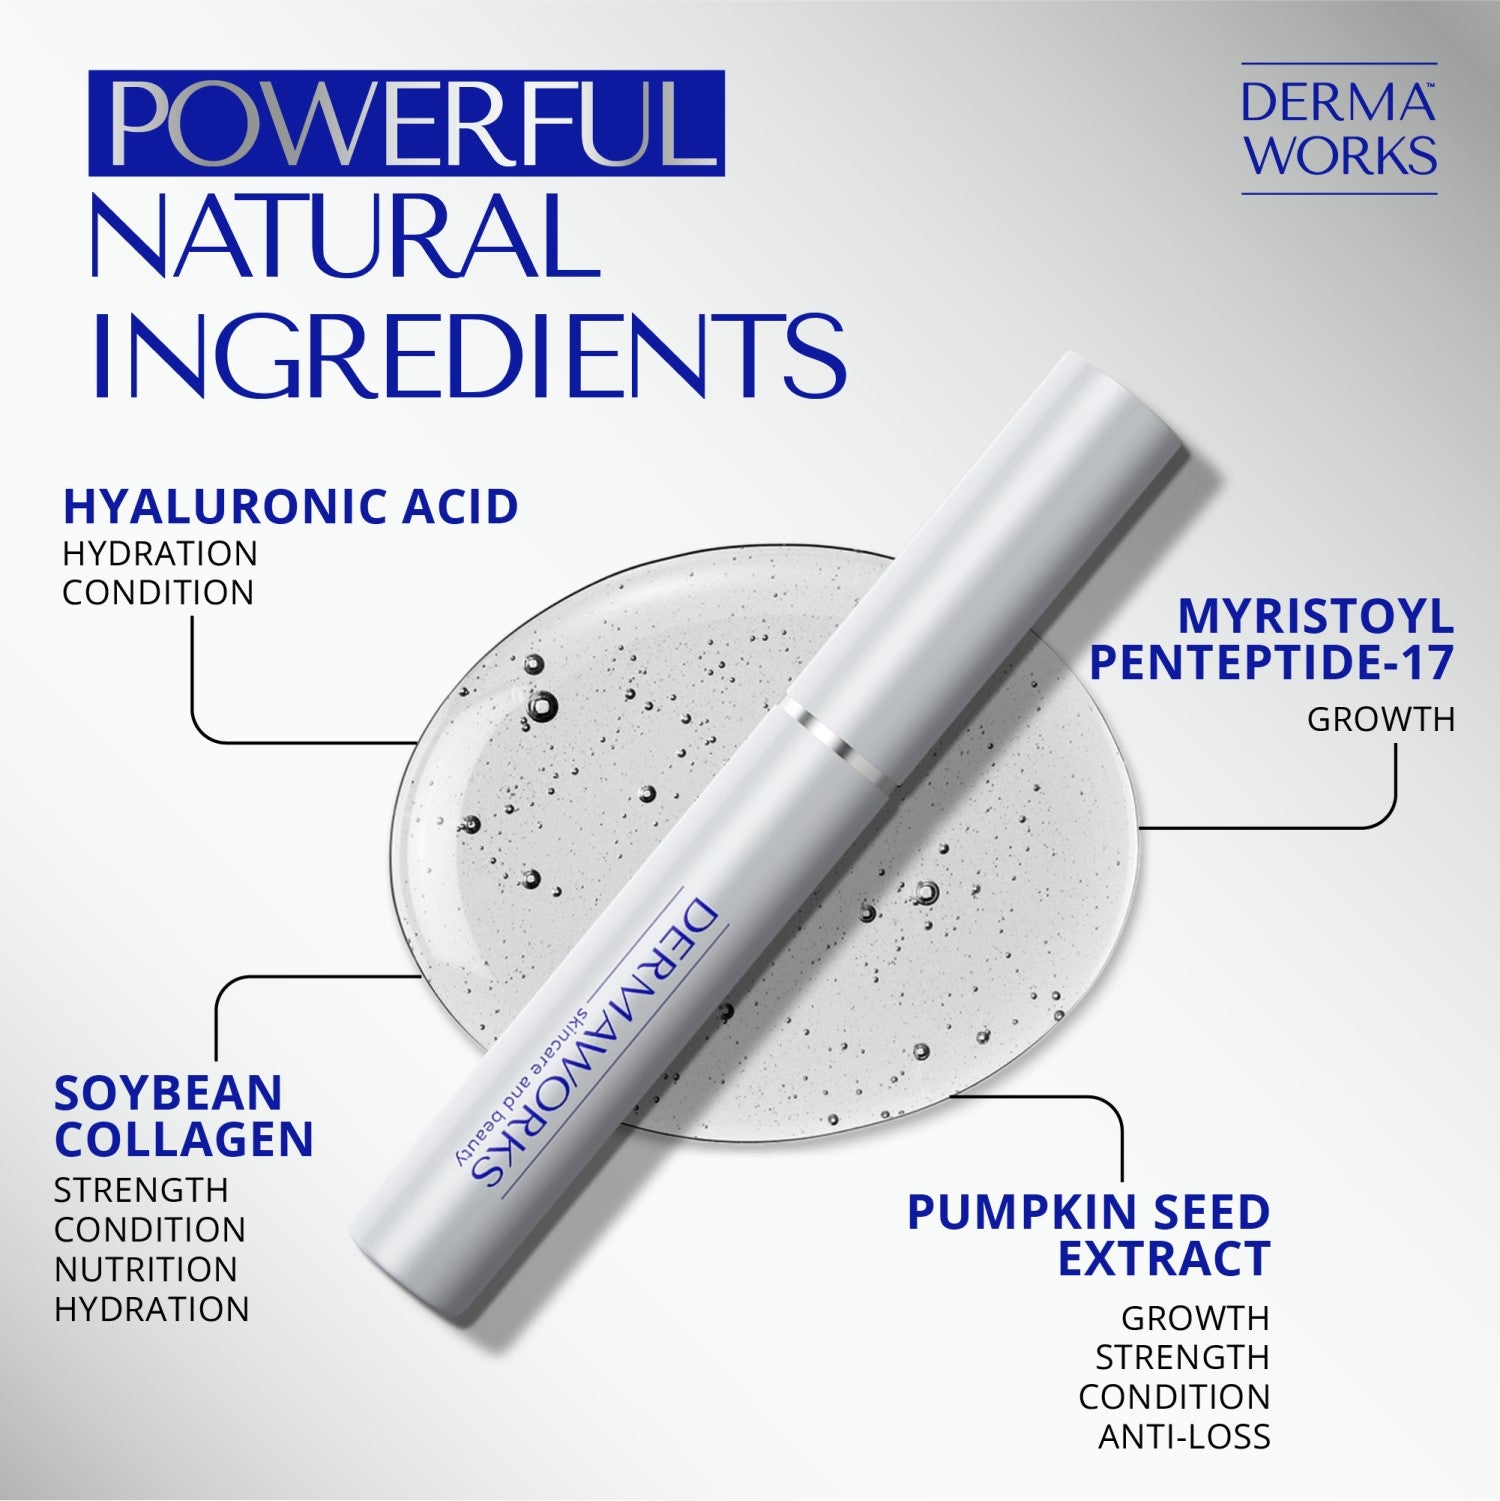 Dermaworks rapid brow growth serum features pumpkin seed extract, hyaluronic acid, soybean collagen and a powerful hair growth peptide.